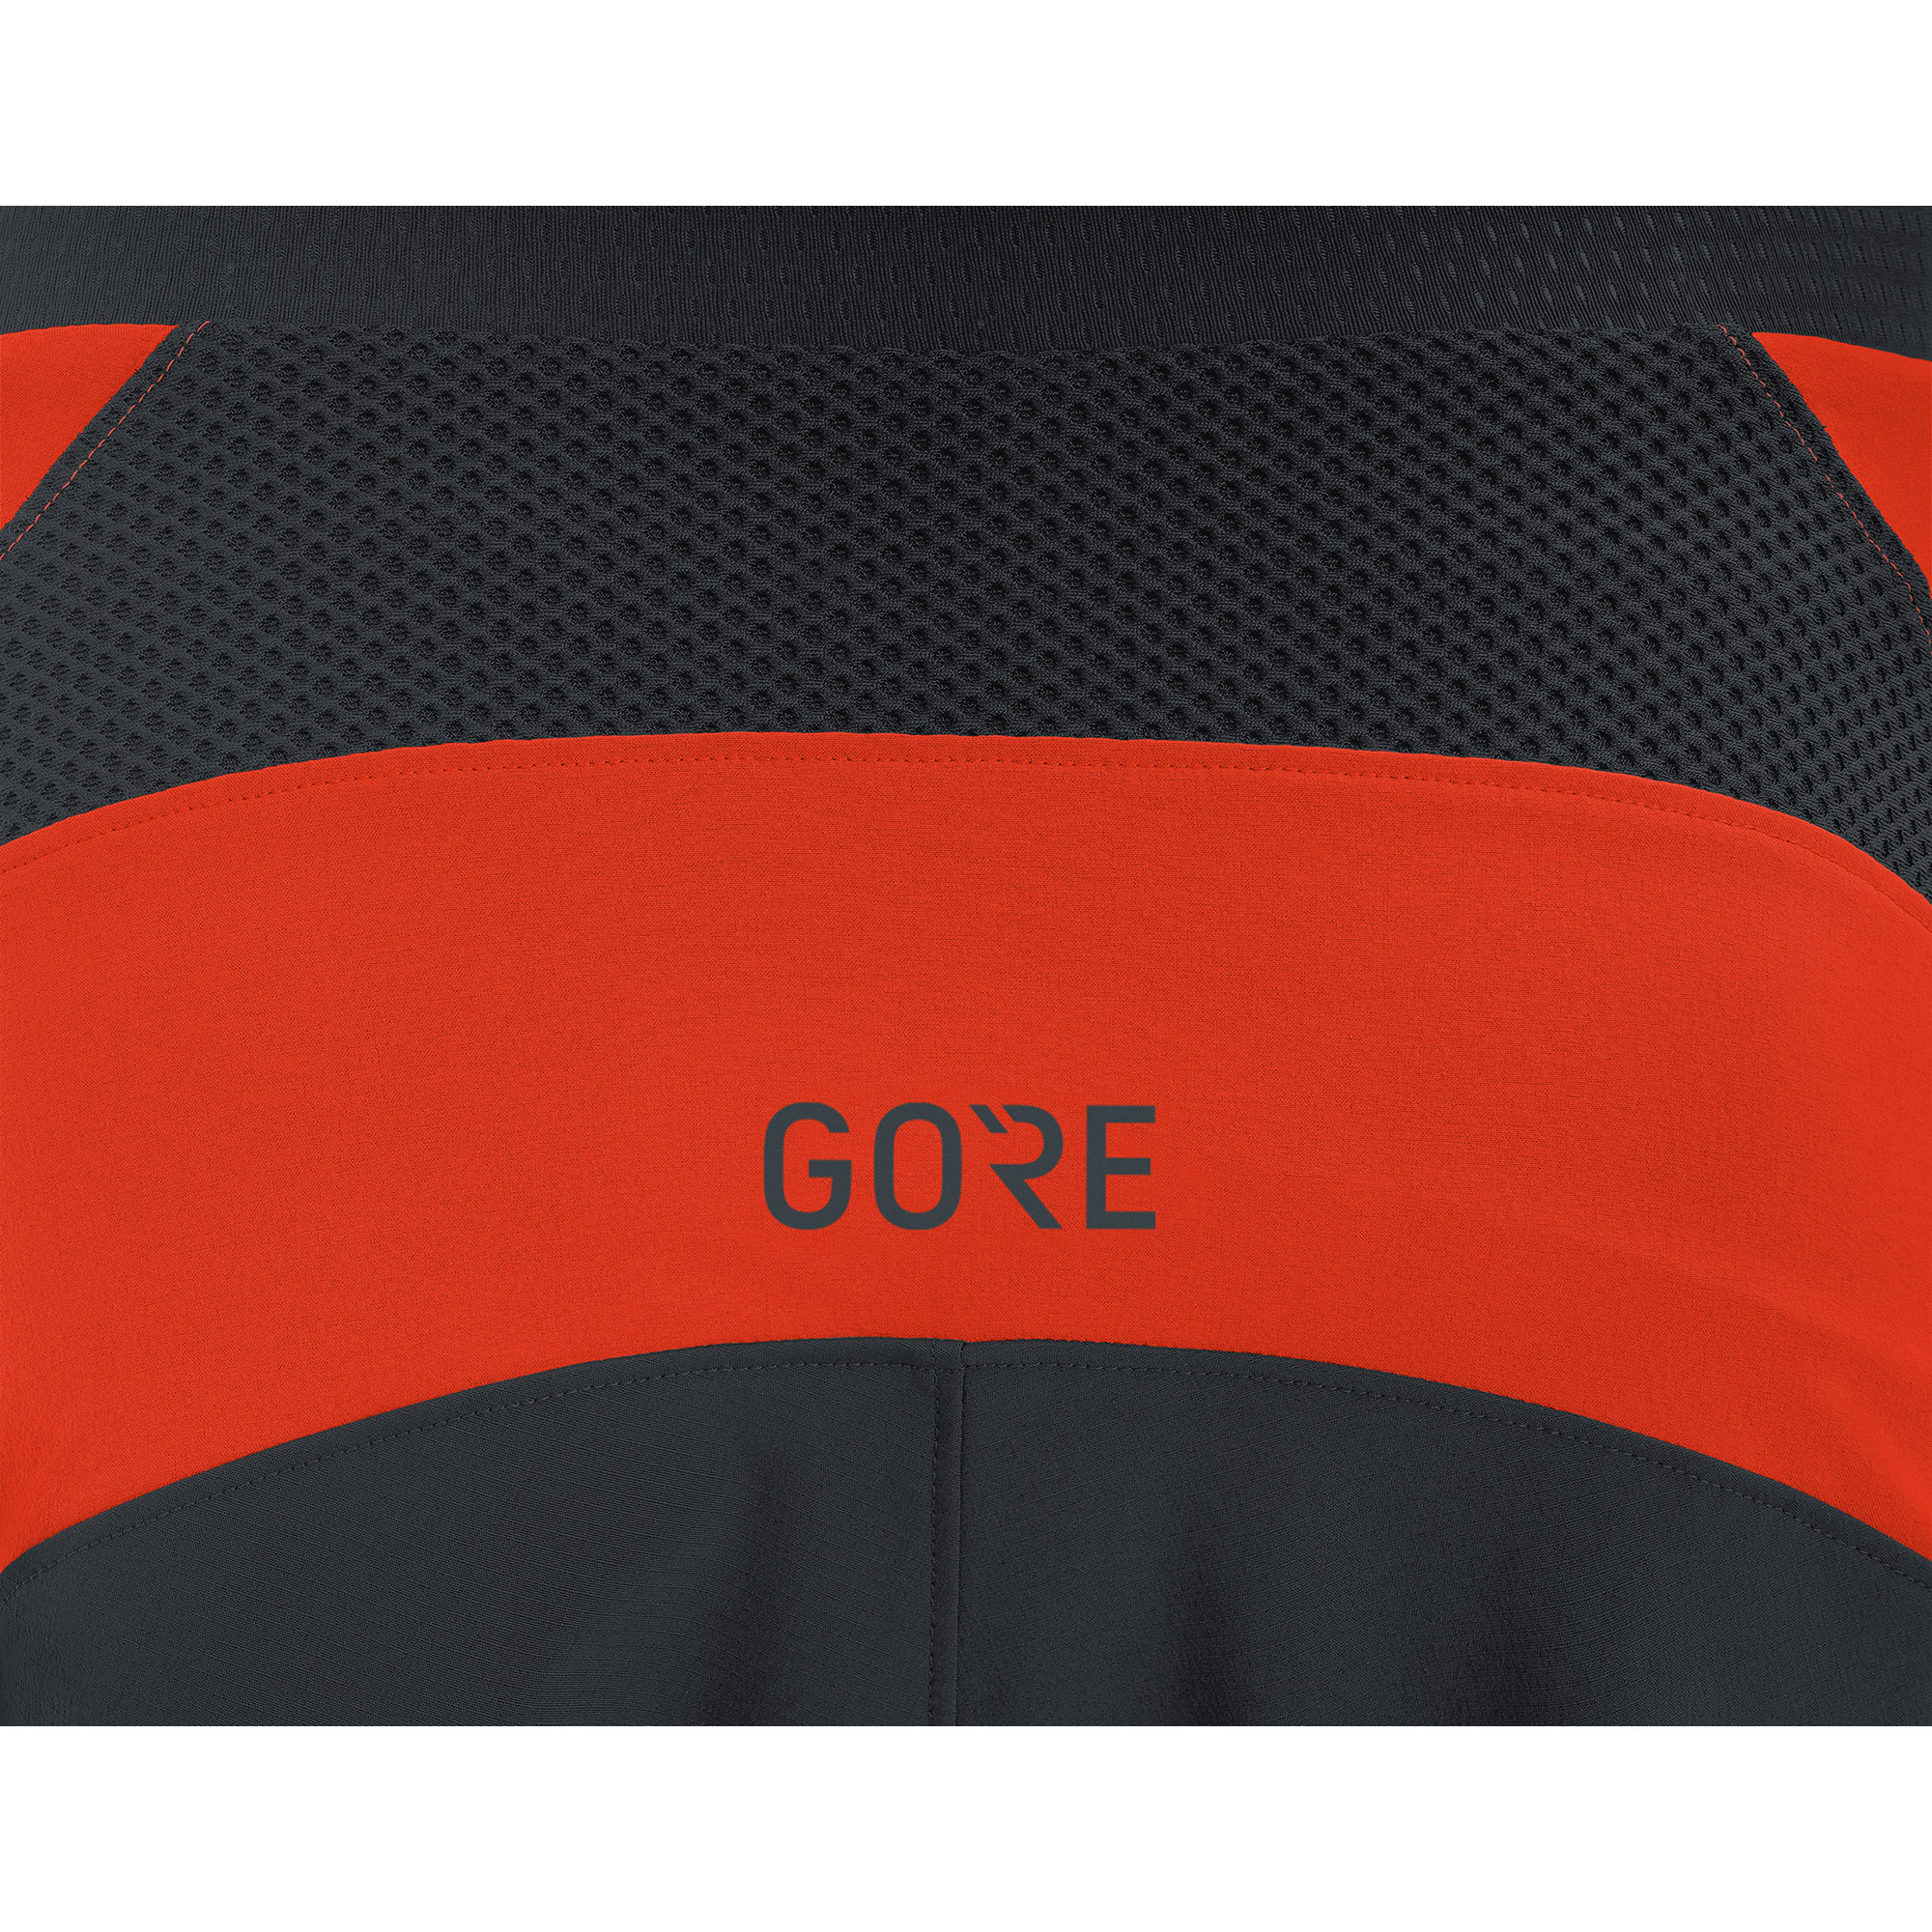 Ditch the shifty chamois with the new GORE Wear C7 bib shorts